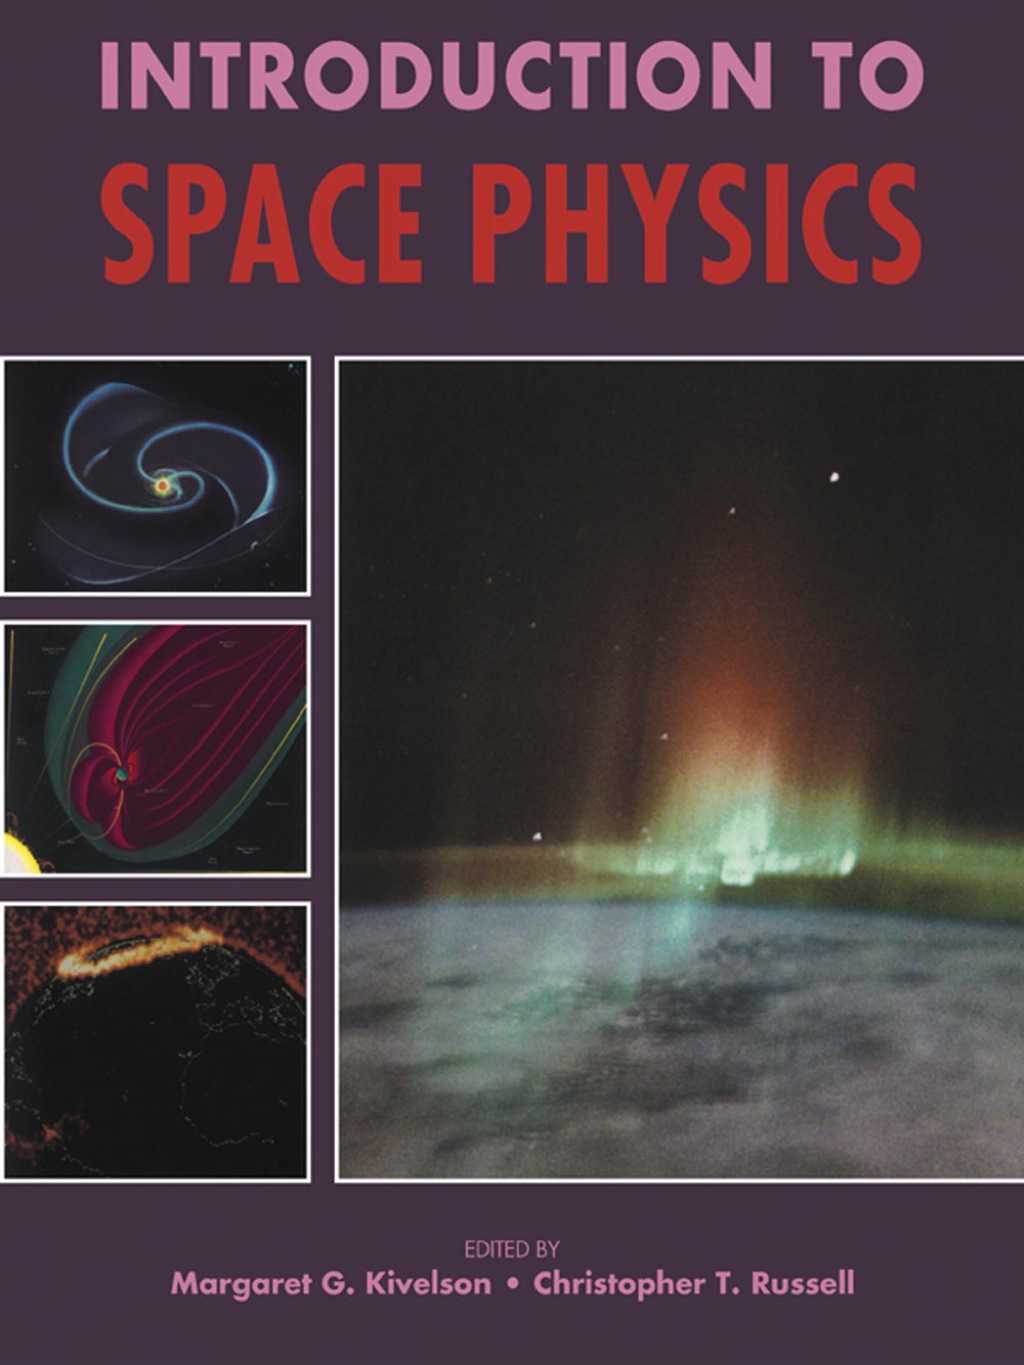 Introduction to Space Physics (eBook) - Margaret G. Kivelson